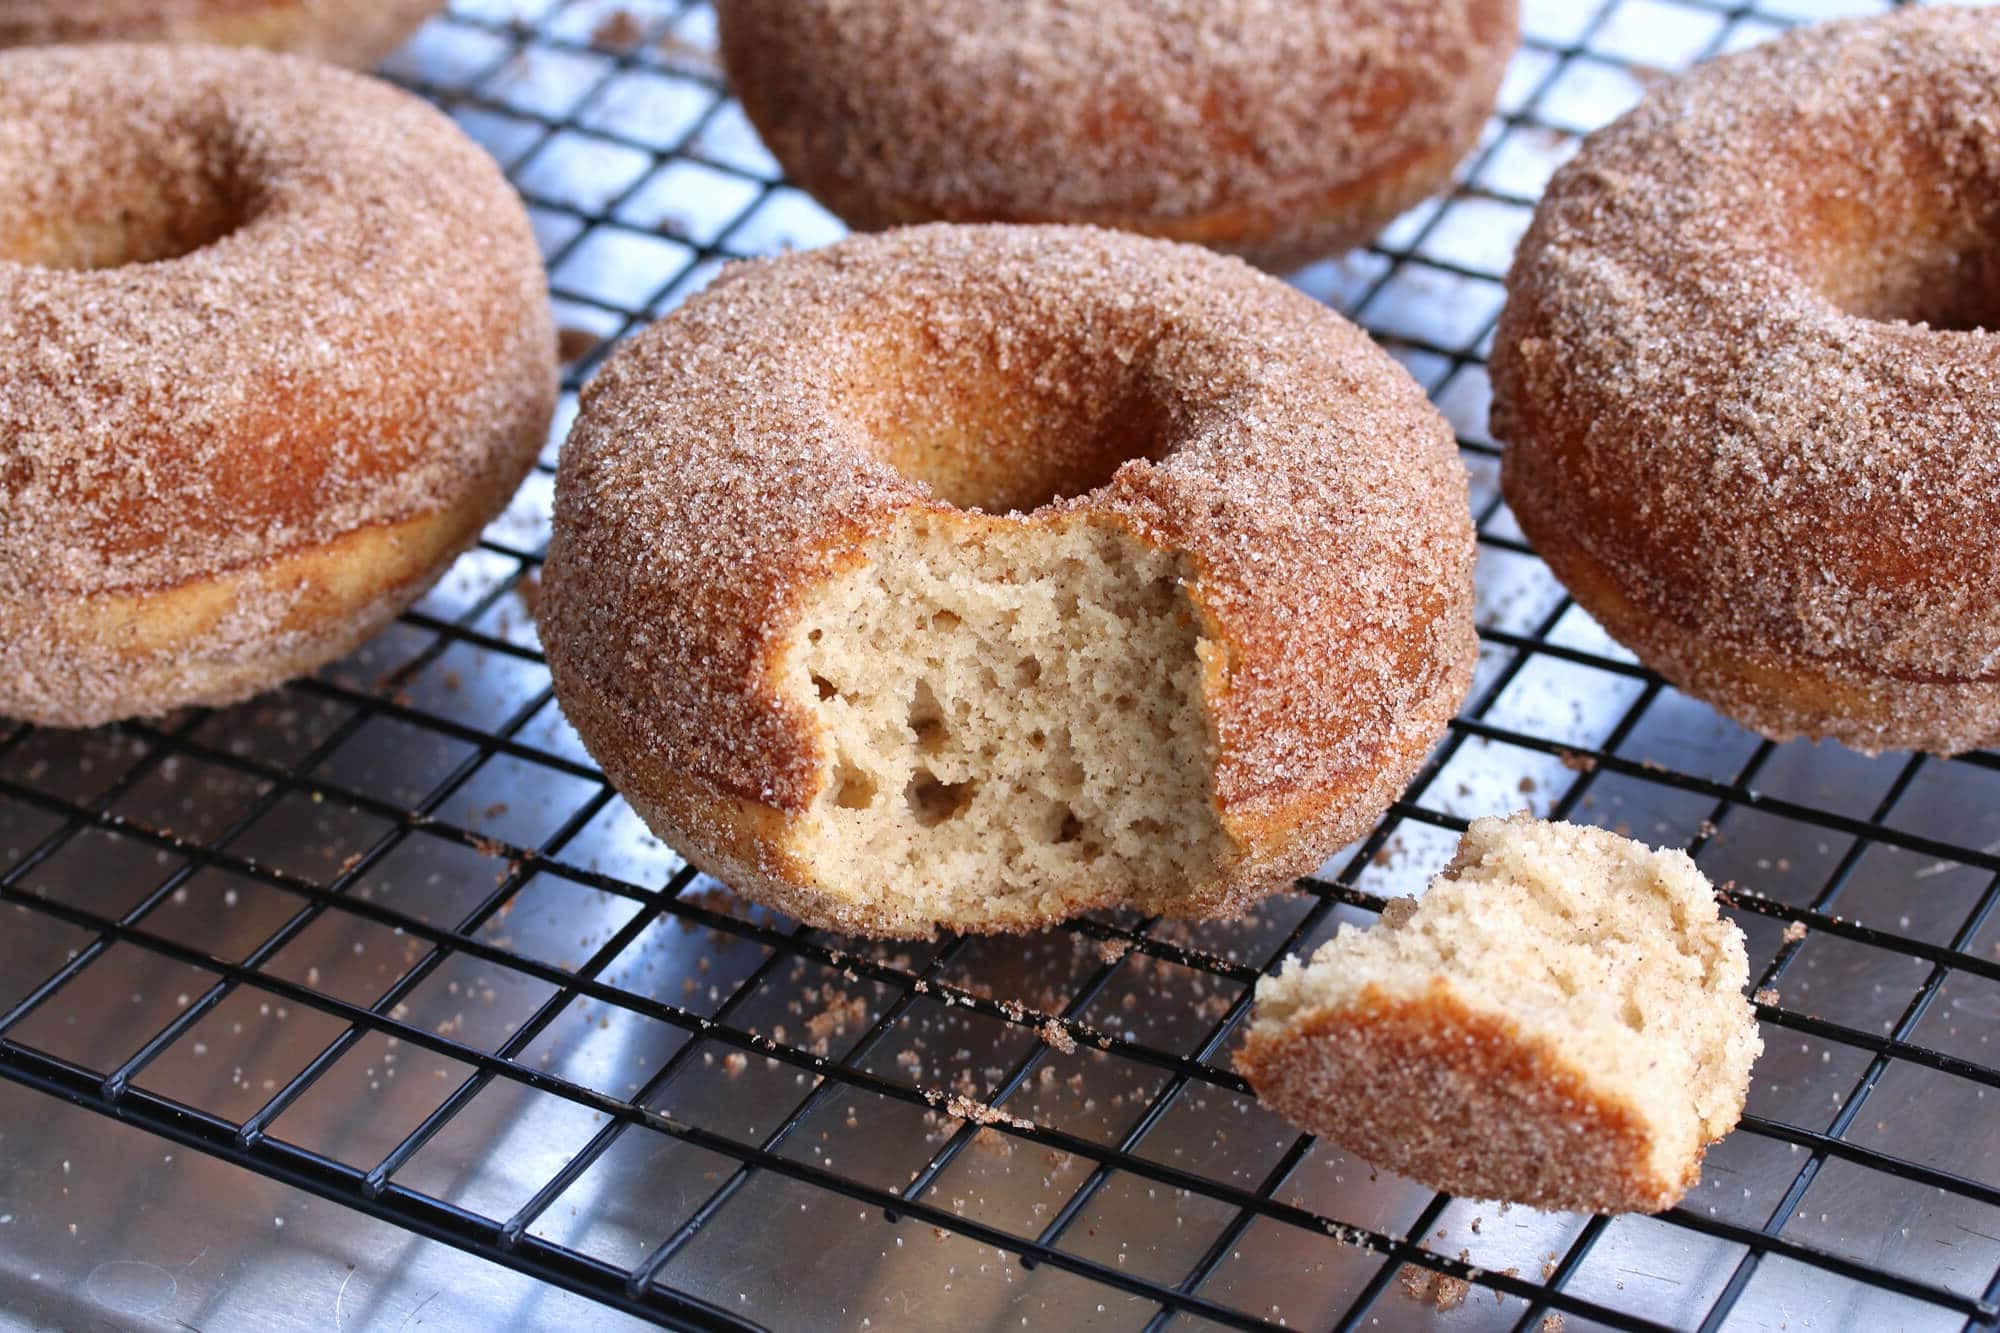 How to Make Homemade Donuts: Baked Gluten-Free Cinnamon Sugar Donut Holes